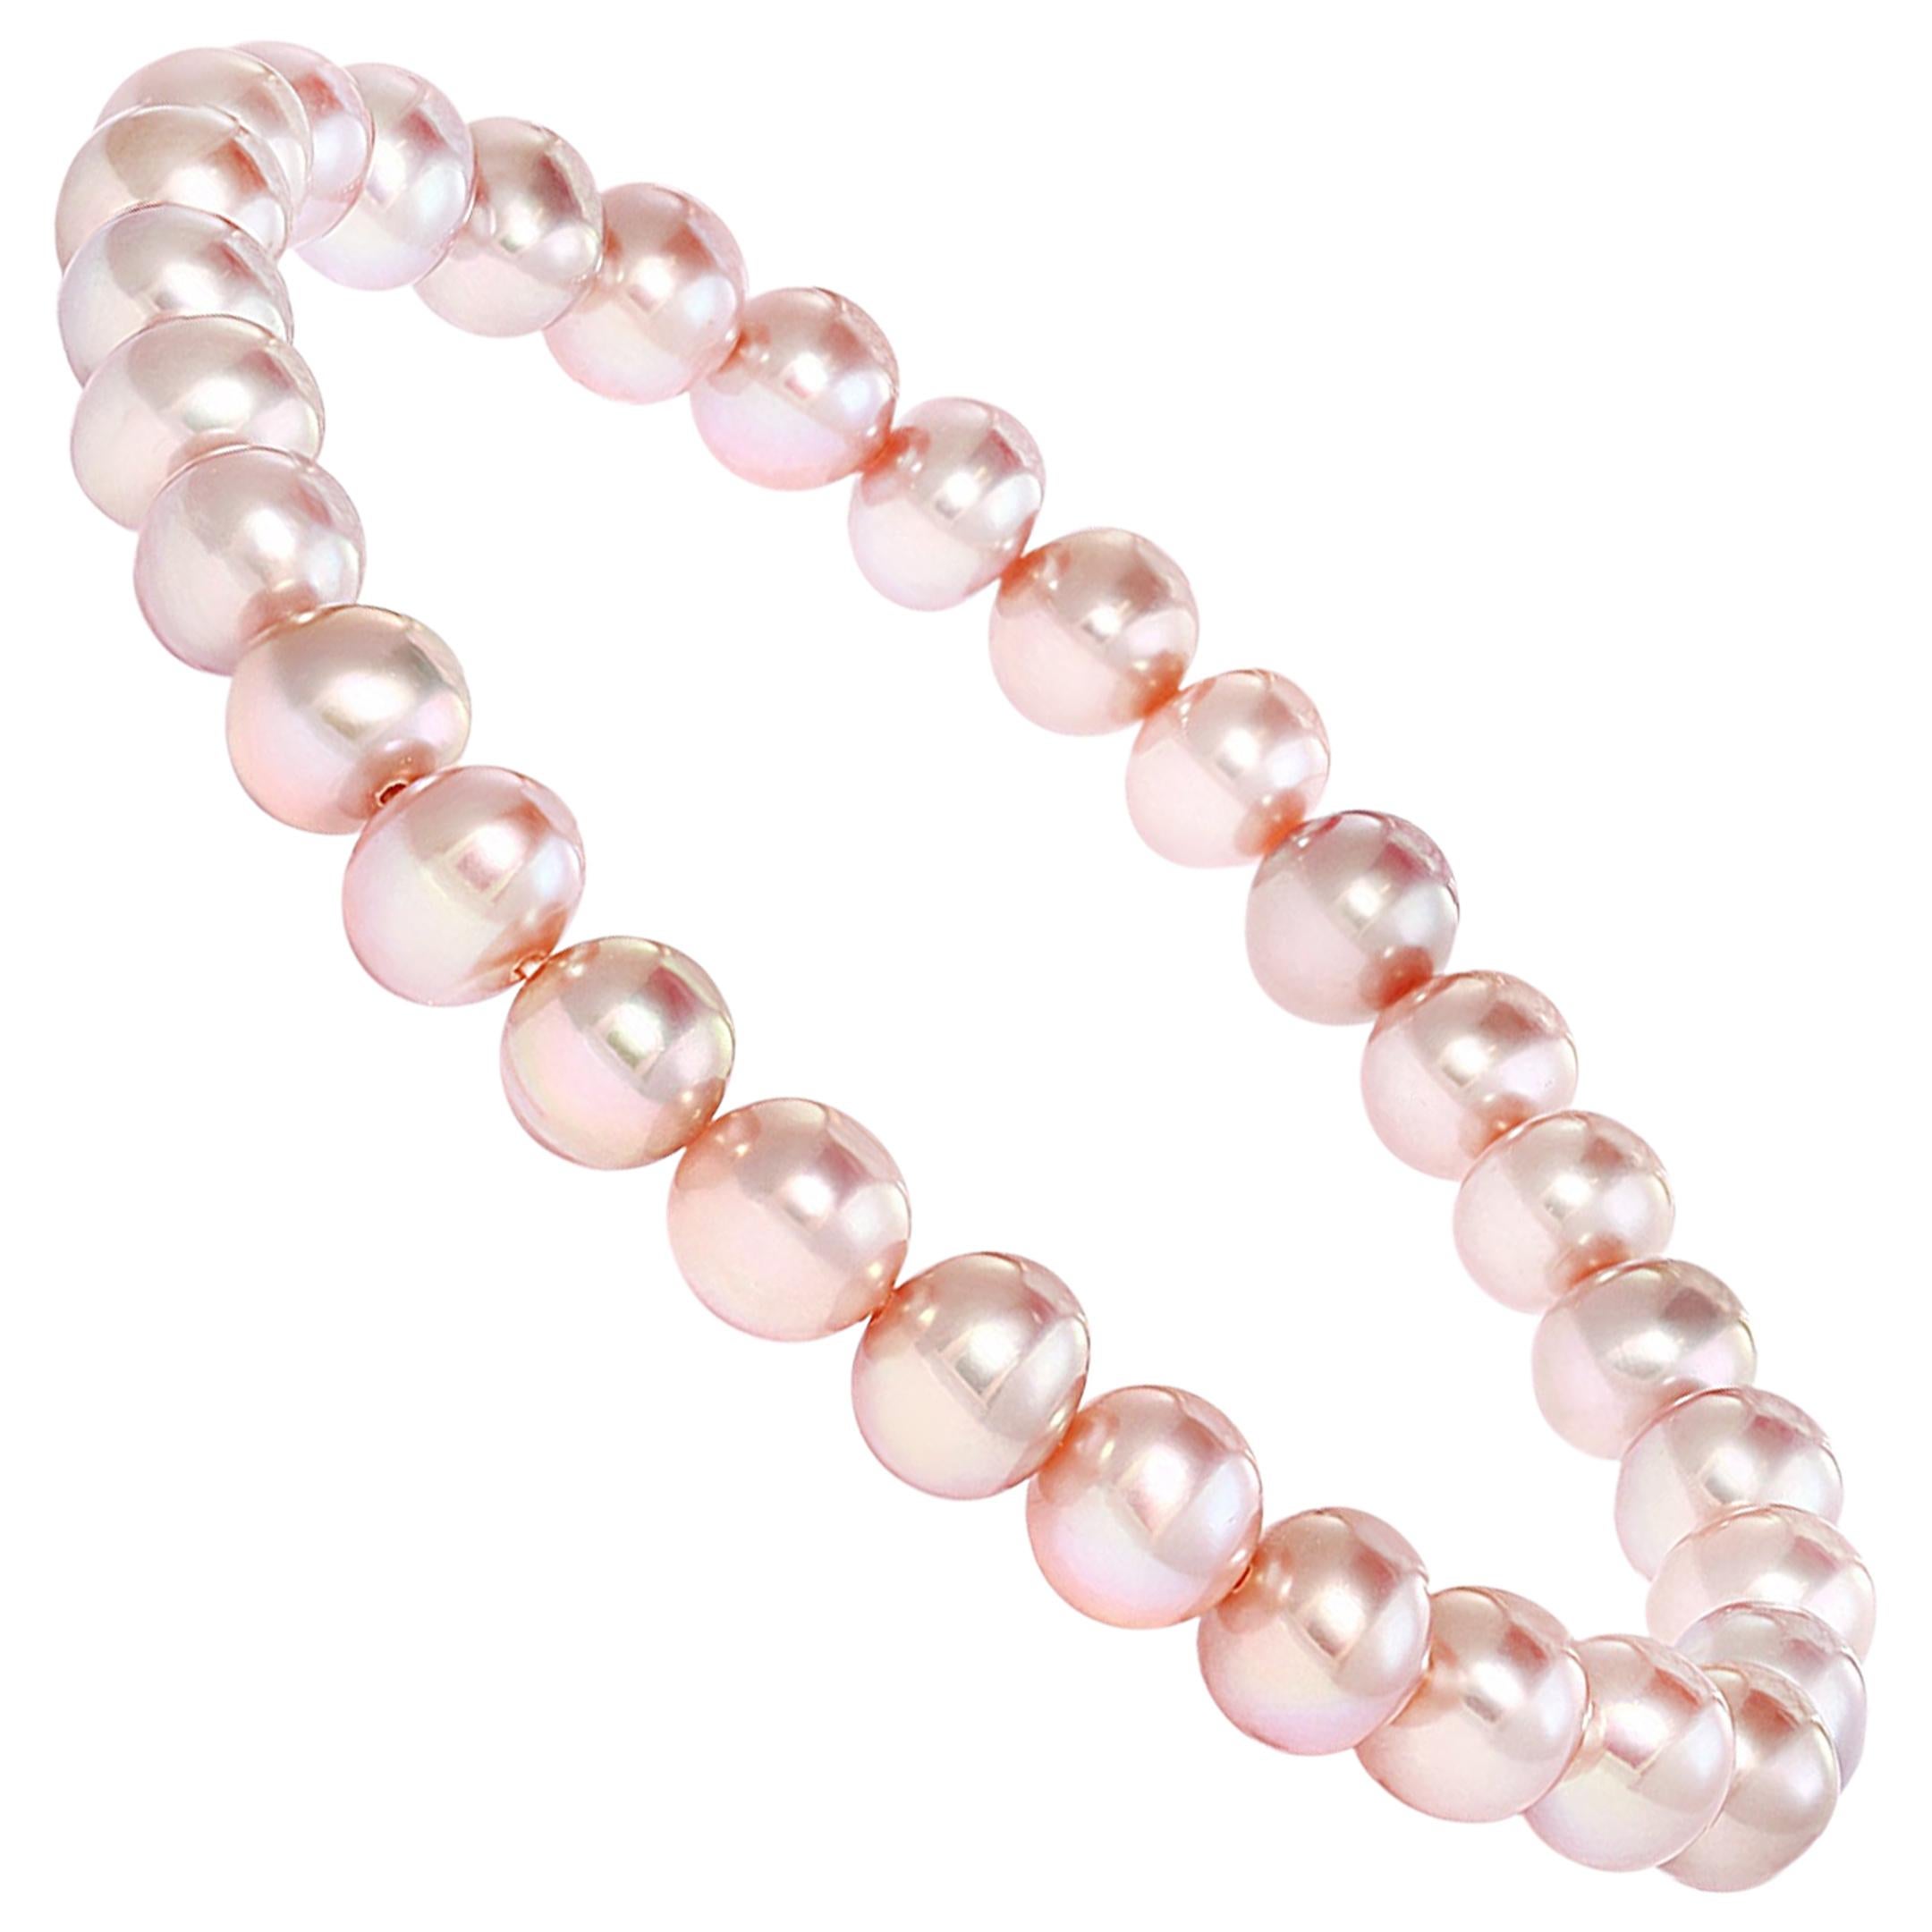 TOUS Nudos 925 Silver Vermeil Rope Bracelet with White Chinese Freshwater Cultured Pearl 9.0 mm 